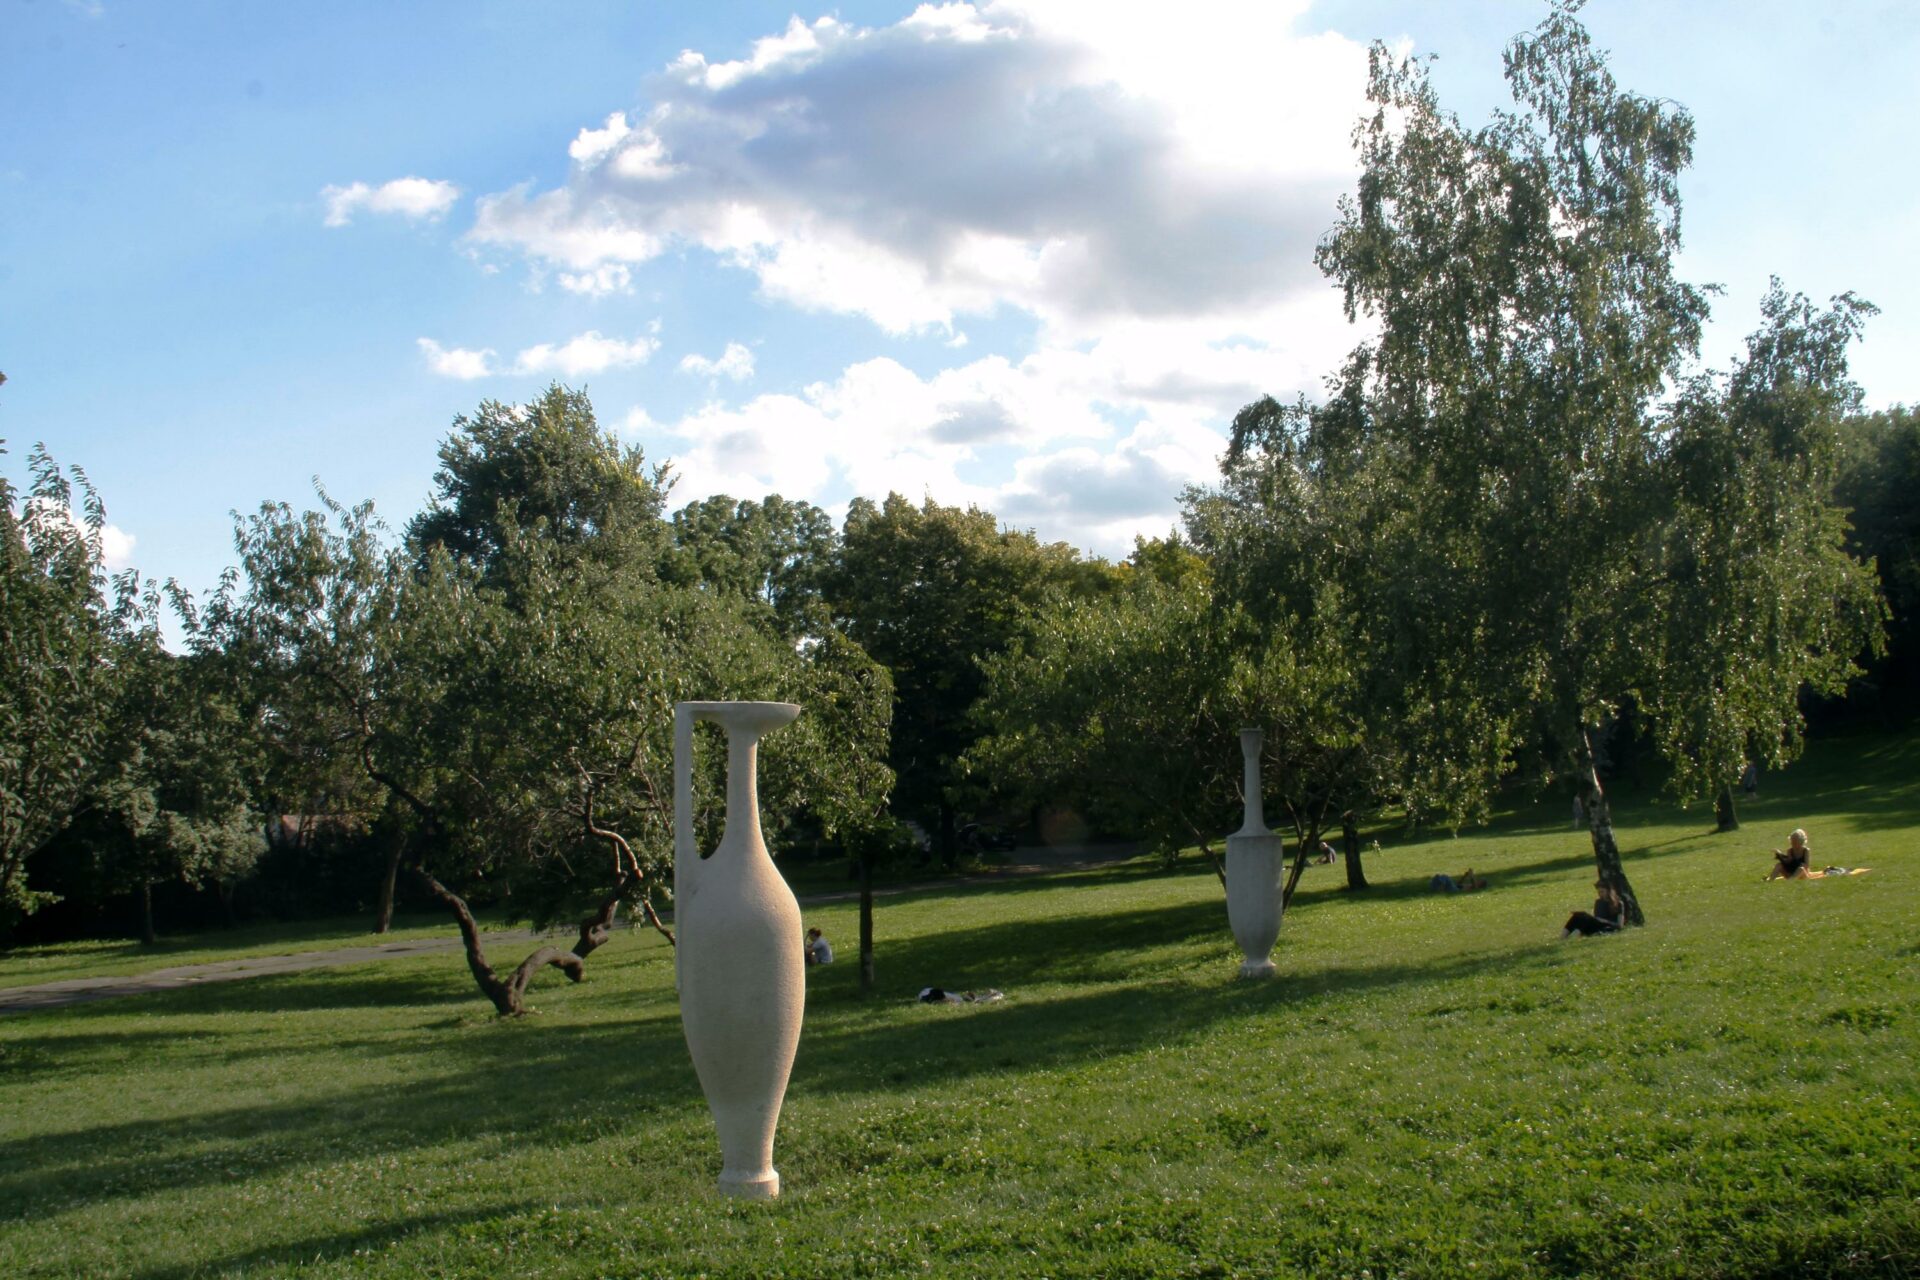 View of the Jubileumi Park amphorae